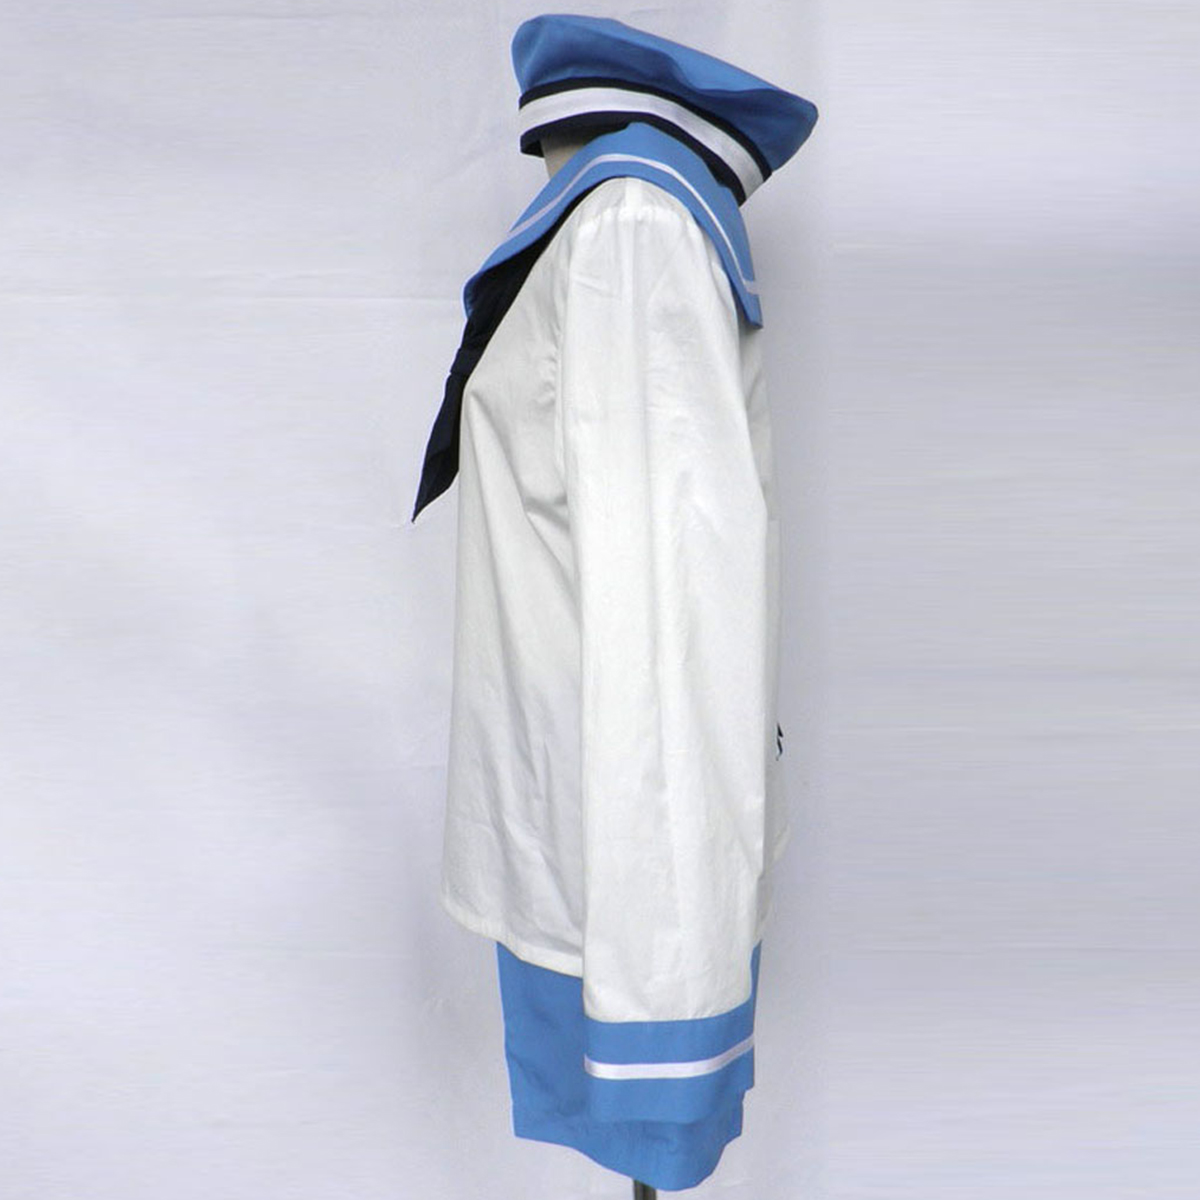 Axis Powers Hetalia North Italy Feliciano Vargas 2 Anime Cosplay Costumes Outfit